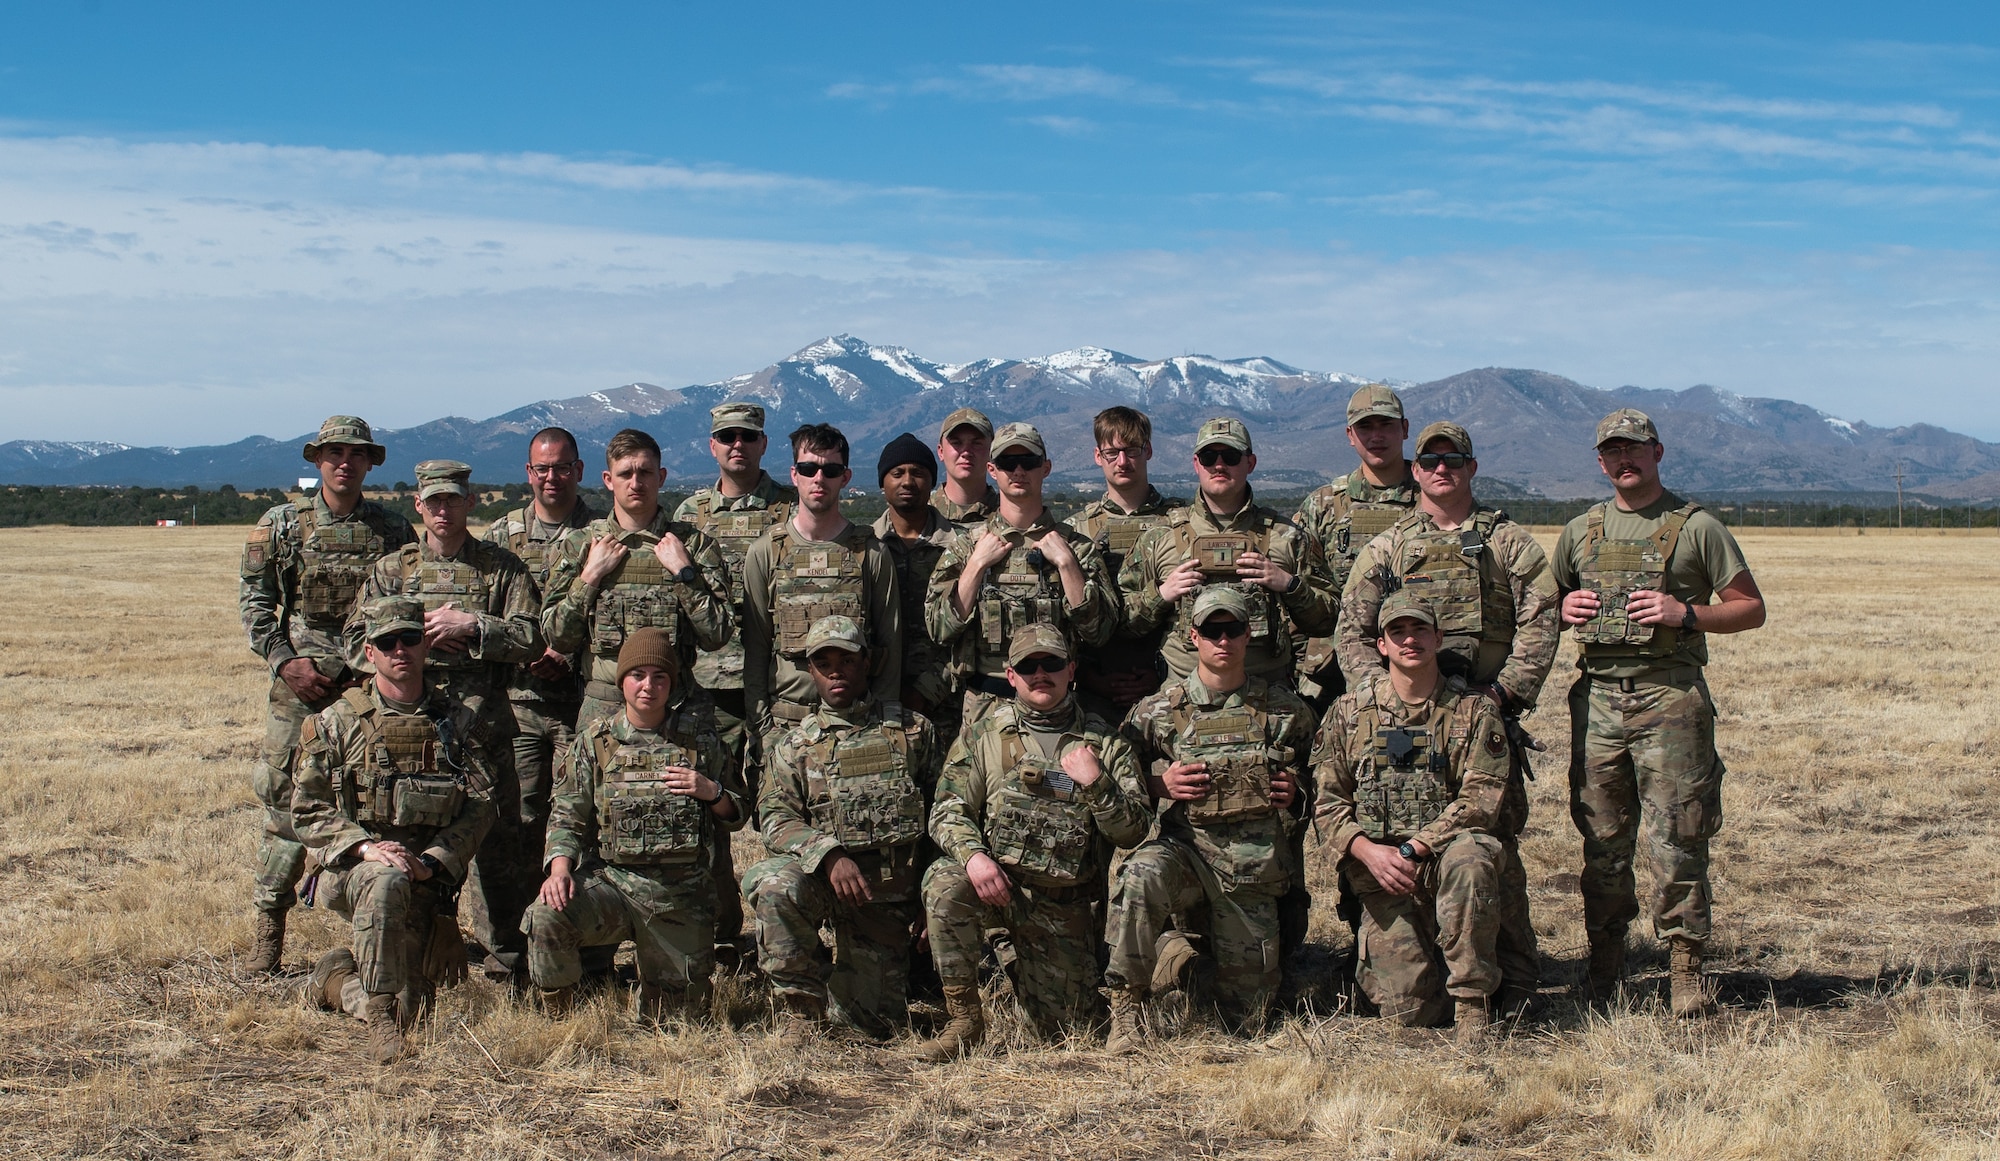 The 27th Special Operations Mission Support Group, Detachment 1 Mission Sustainment Team 2 poses for a photo in front of the Sierra Blanca mountains during the Full Mission Profile 22-3 exercise, at the Sierra Blanca Regional Airport, New Mexico. (U.S. Air Force photo by Senior Airman Christopher Storer)